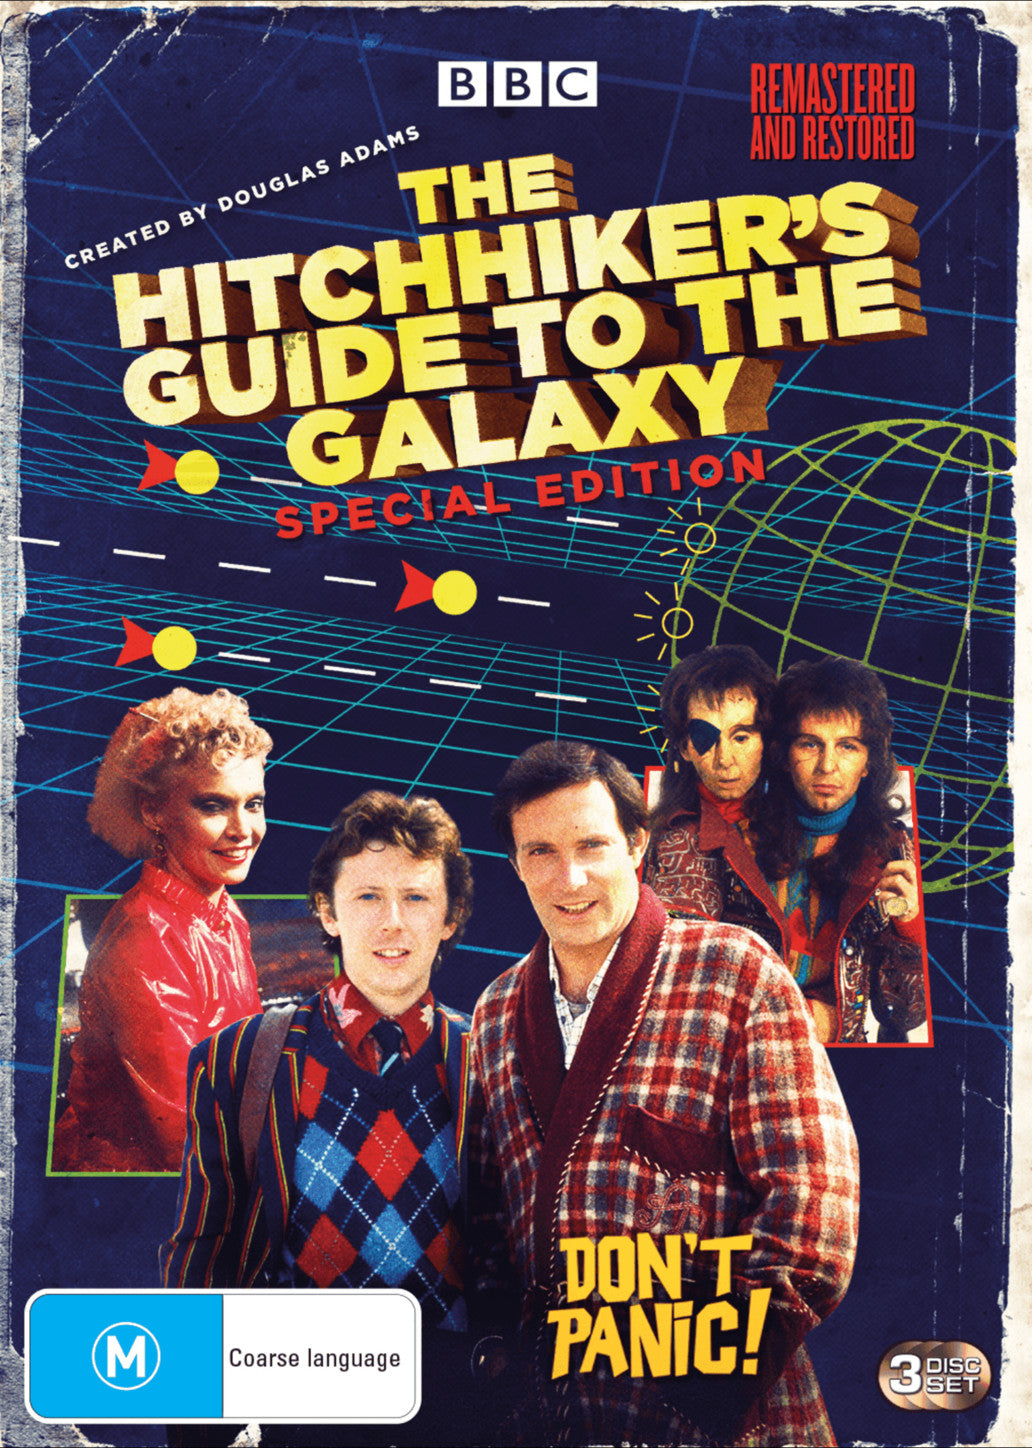 HITCHHIKER'S GUIDE TO THE GALAXY, THE (1981) (SPECIAL EDITION)